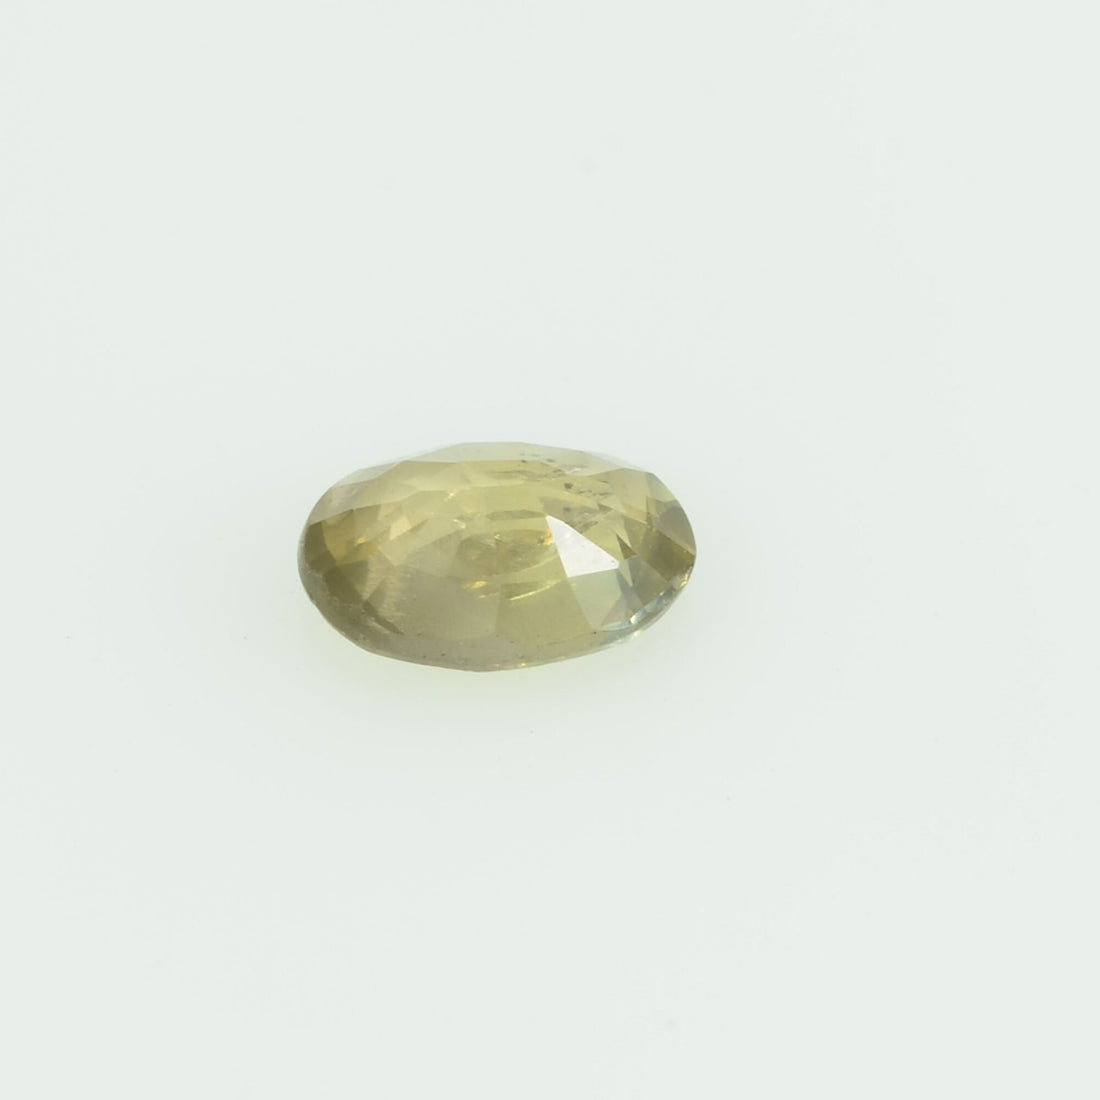 Natural Yellow Sapphire Loose Gemstone Oval Cut